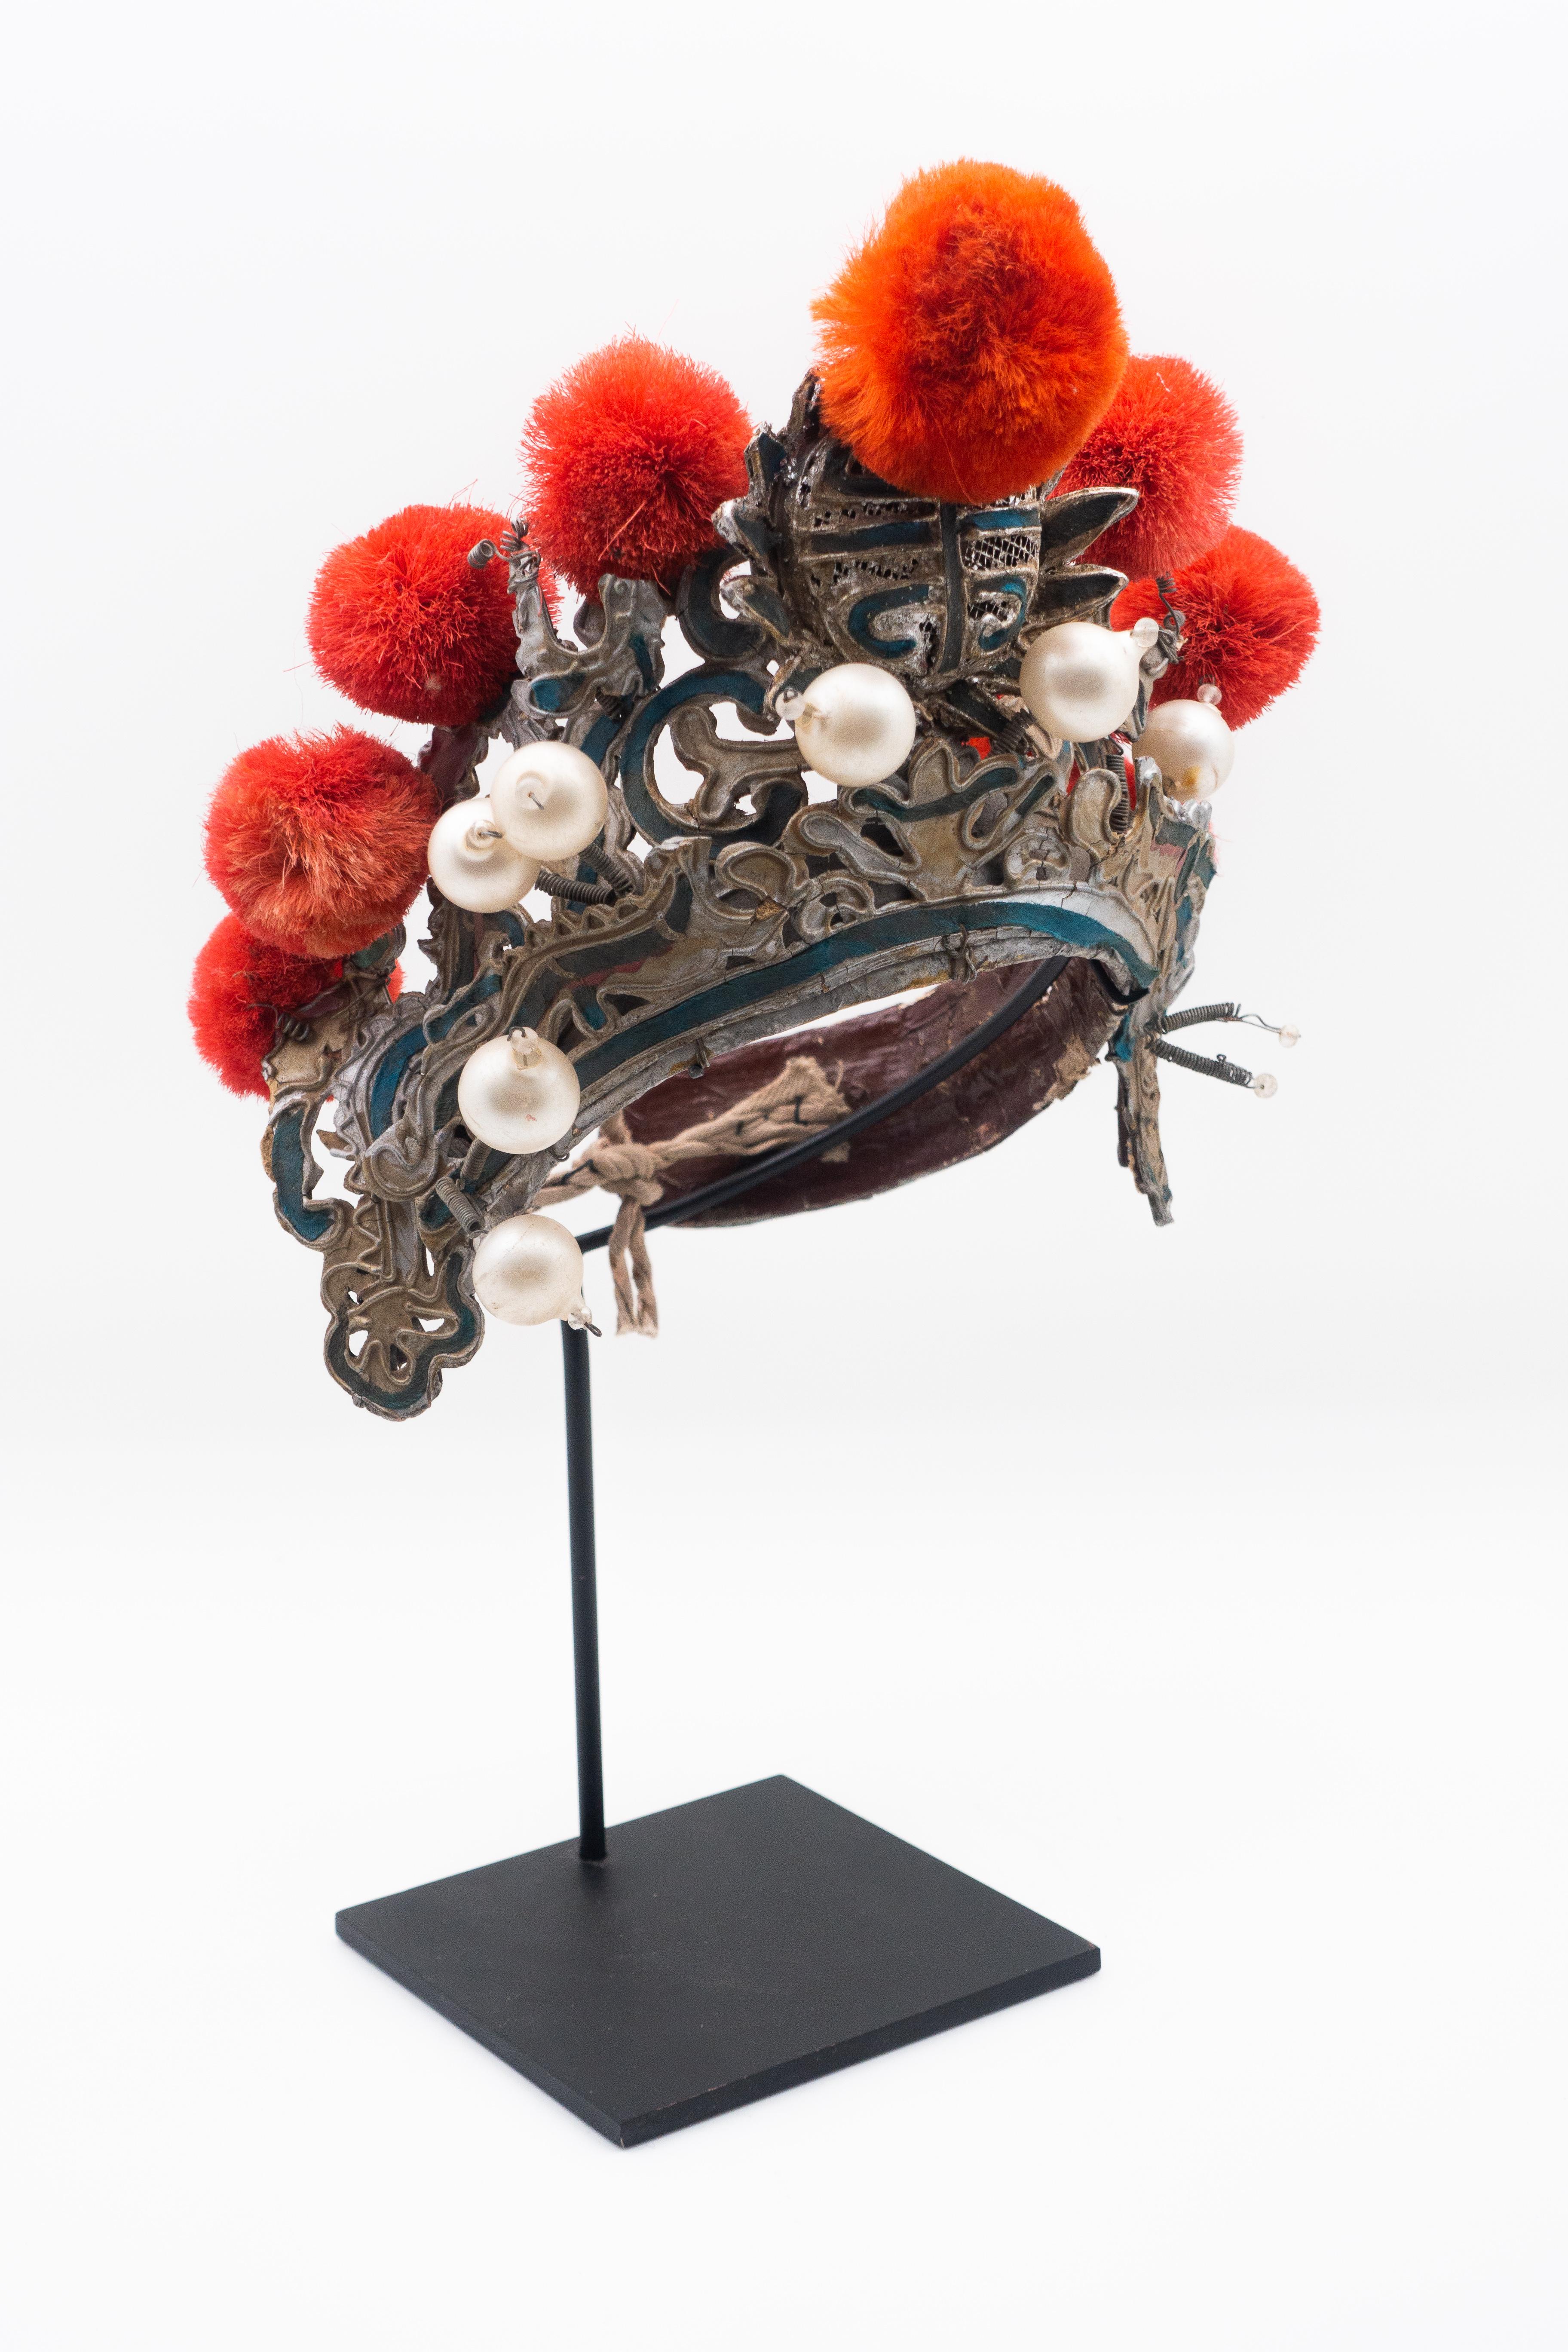 Chinese opera theatre headdress in turquoise with coral colored pom poms along with faux pearls, early 20th century, mounted on a custom black painted metal base.